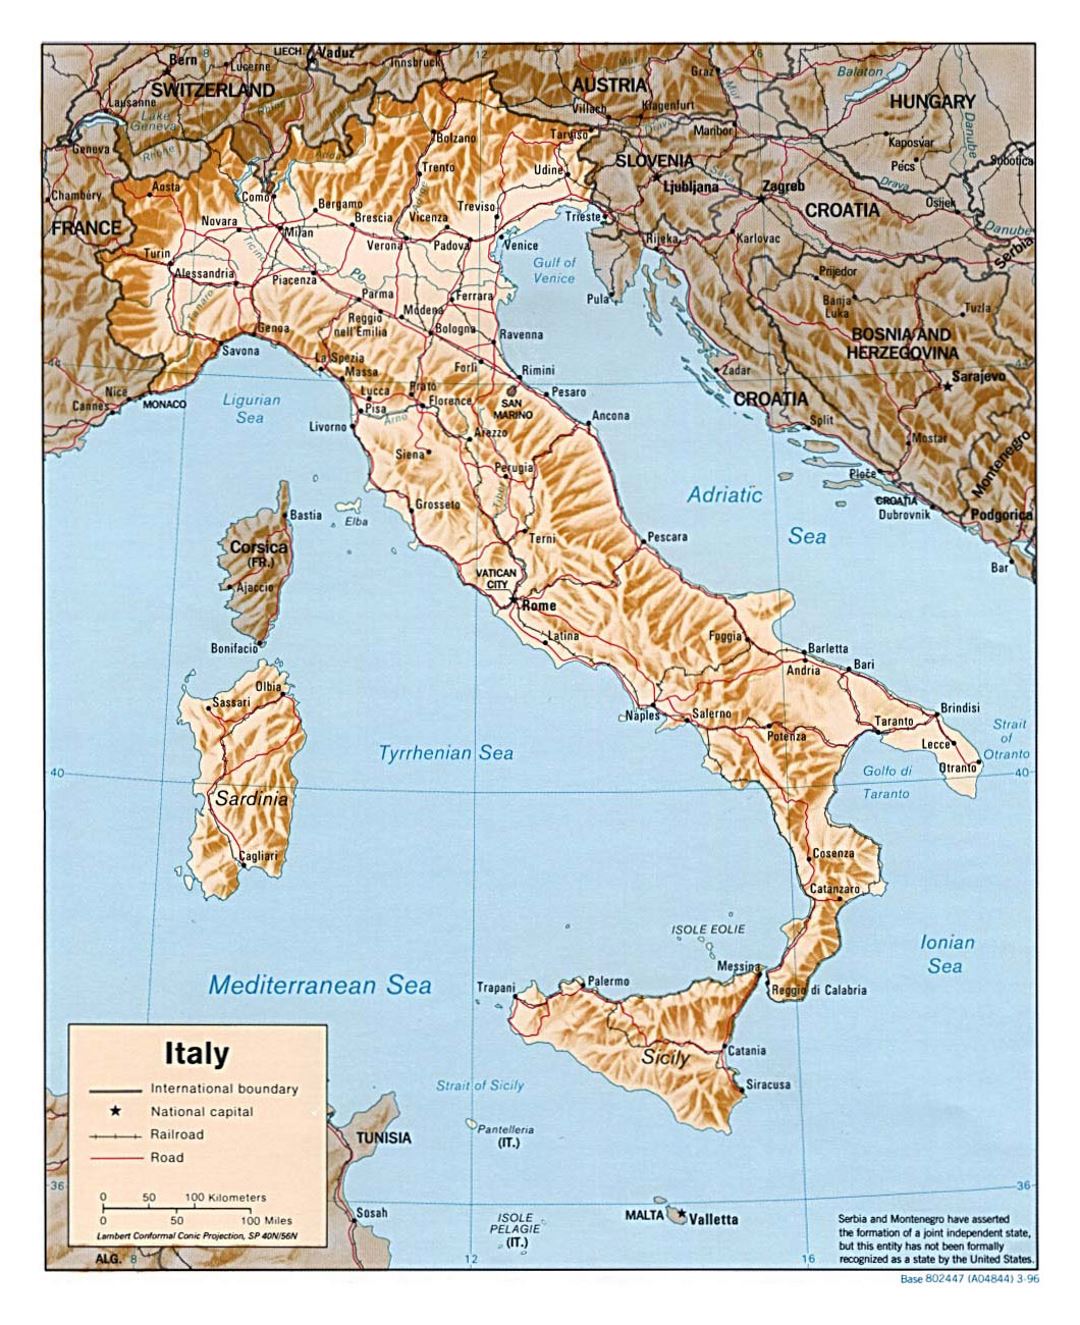 Large political map of Italy with relief, roads, railroads and major cities - 1996